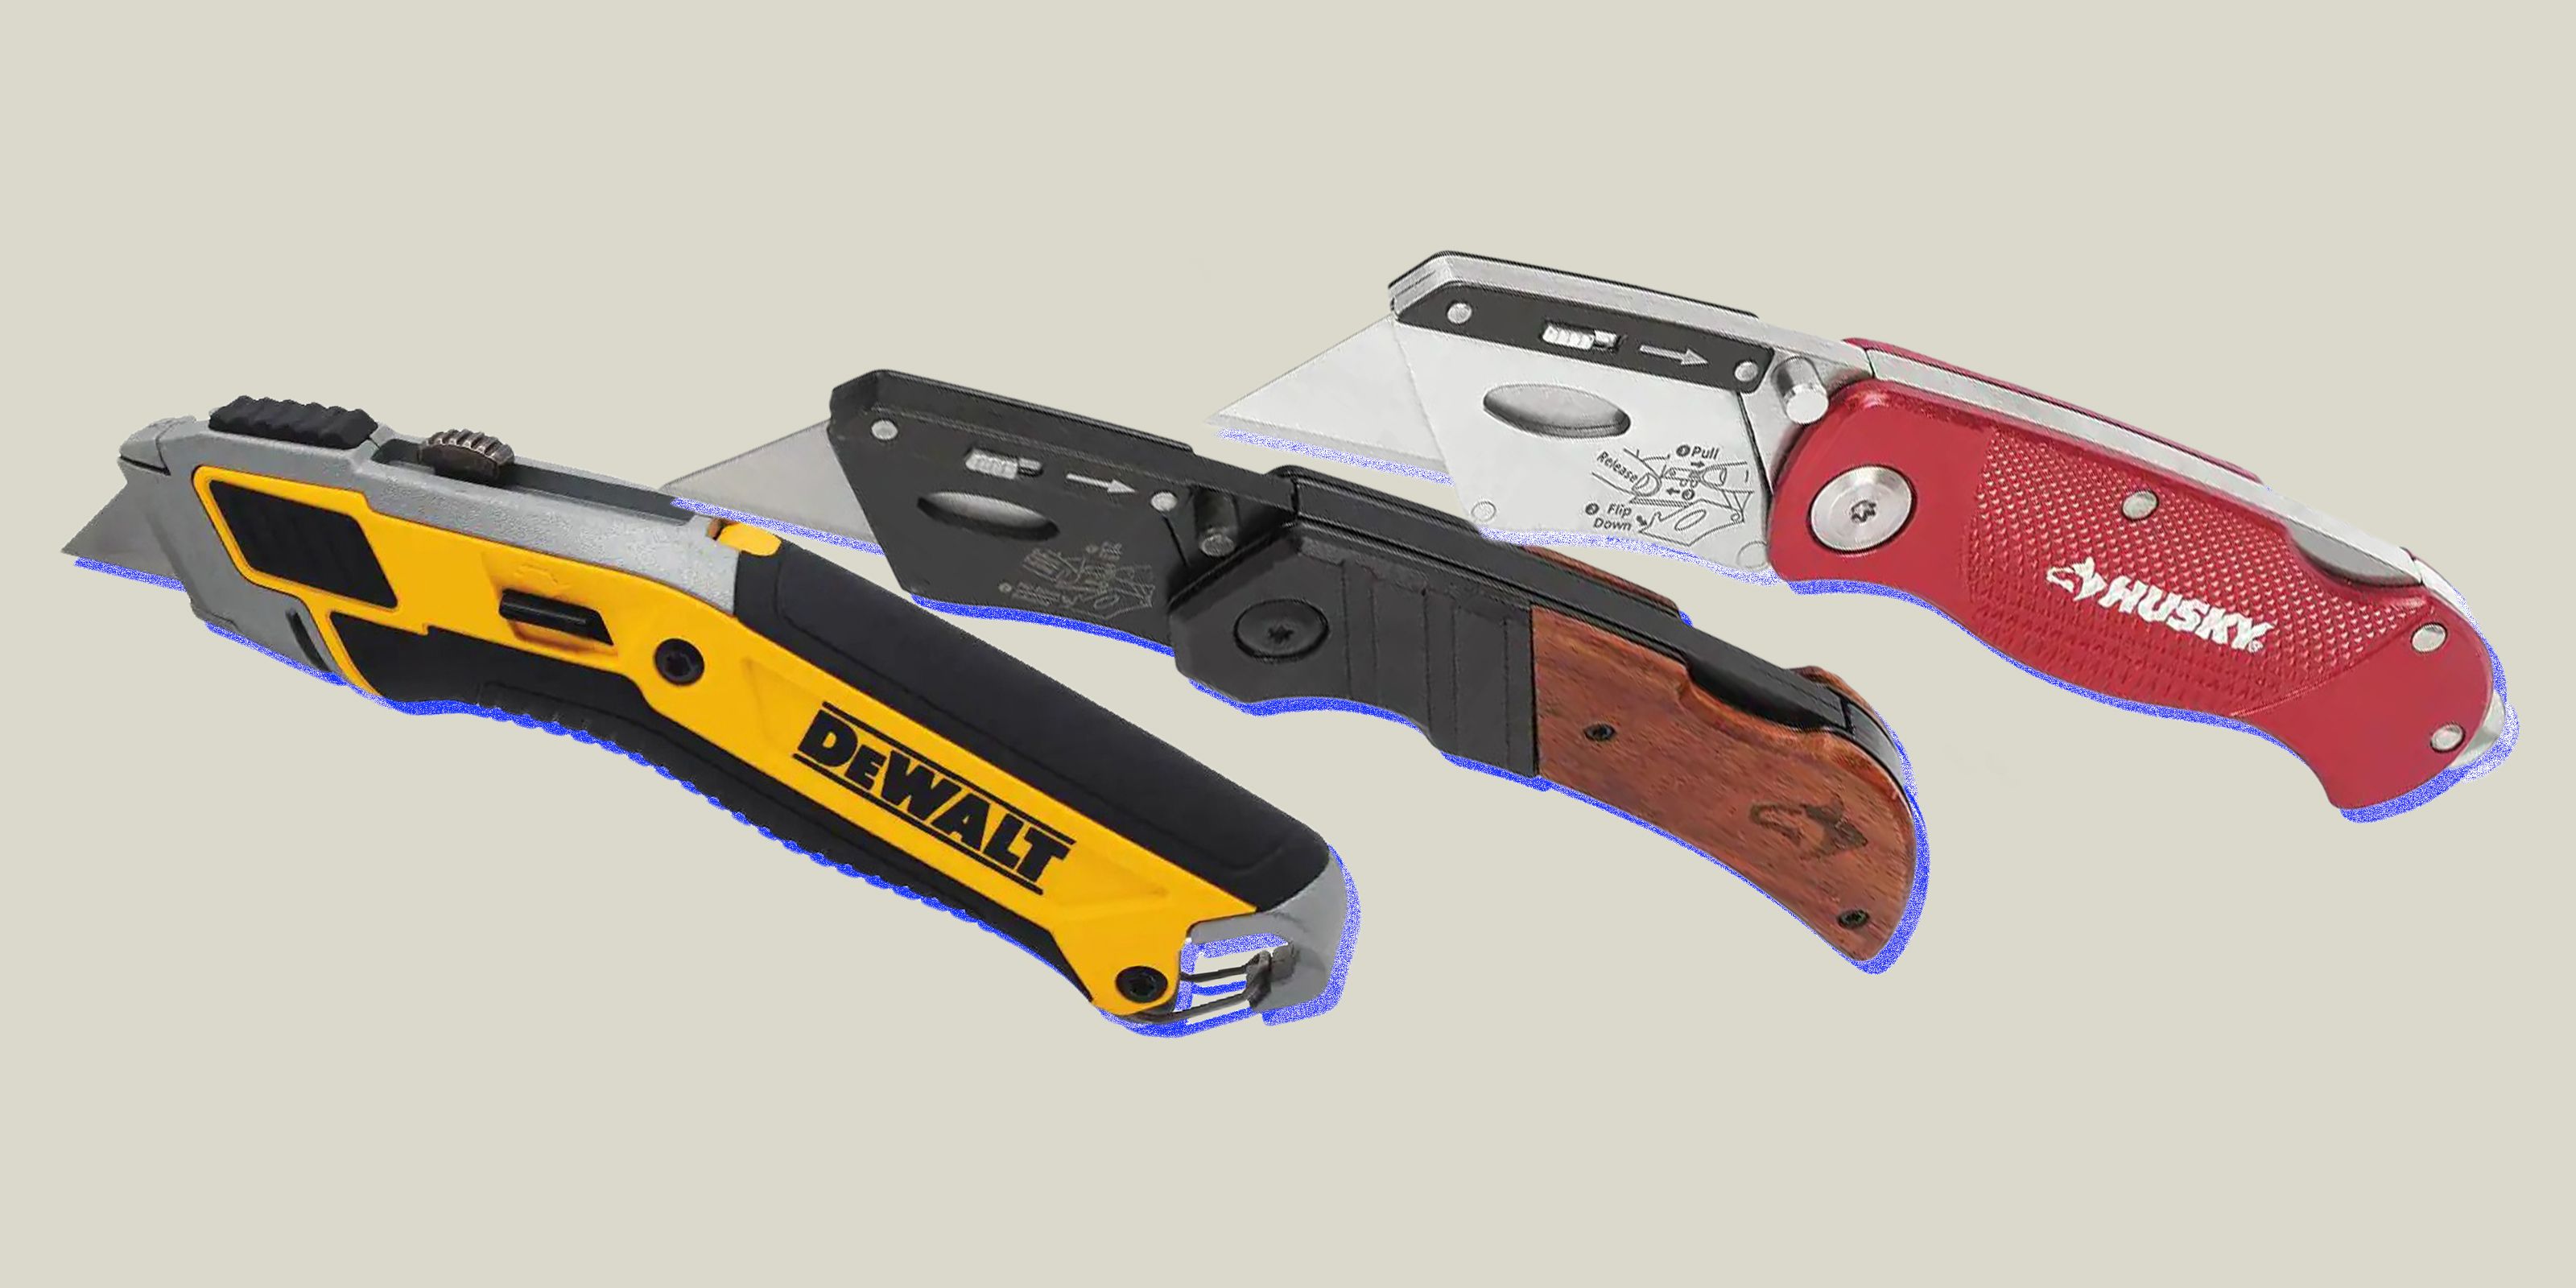 The Best Utility Knives For Everyday Tasks